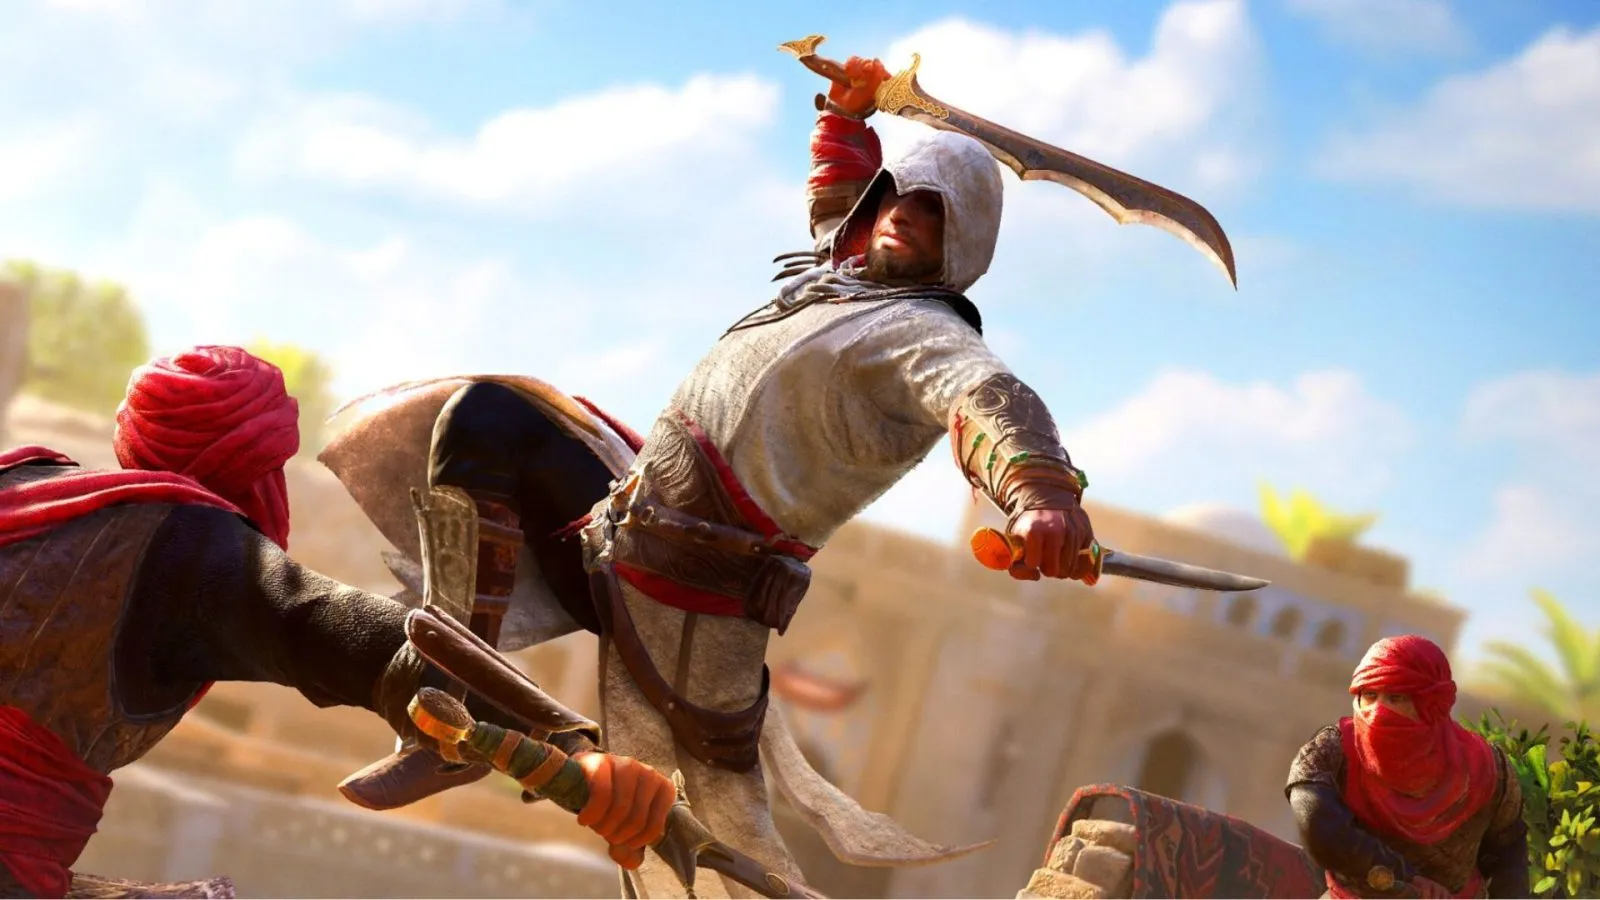 Assassin's Creed Mirage Gets New Game Plus Next Week, but